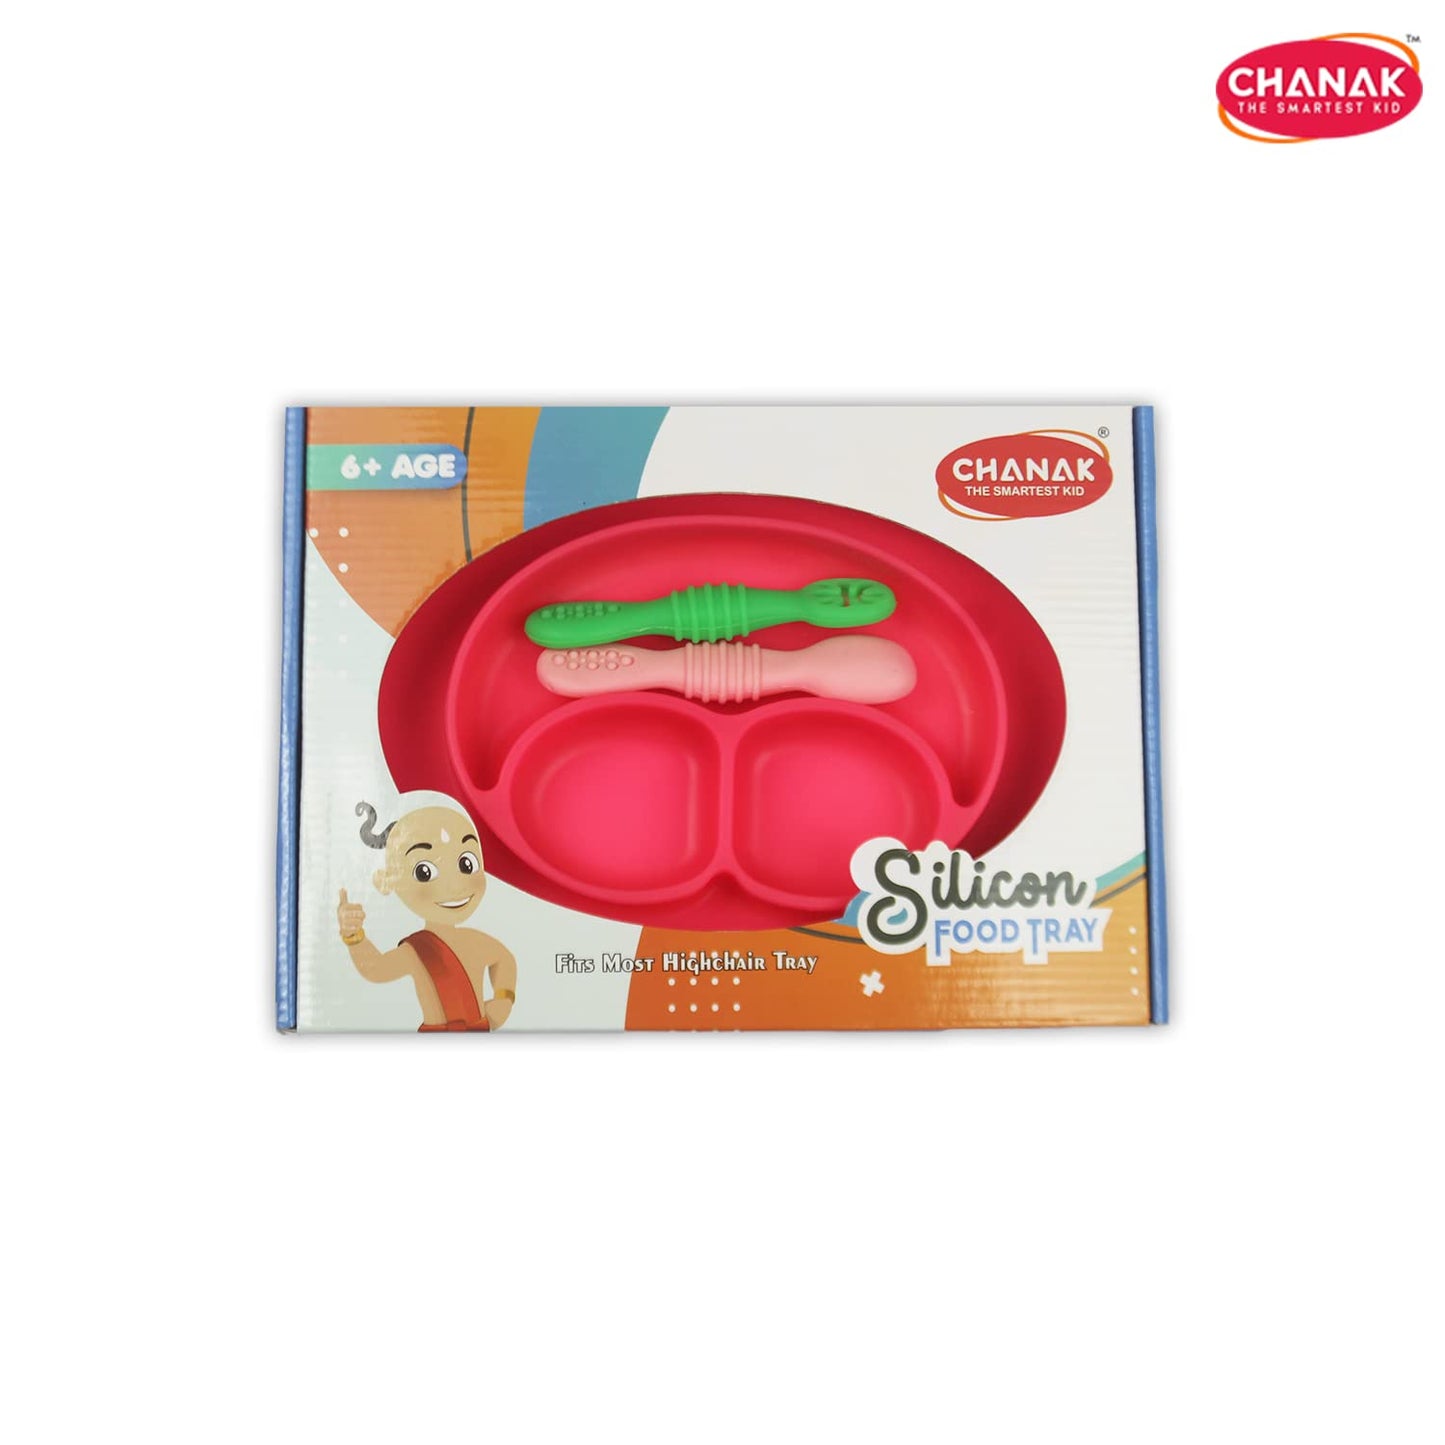 Chanak Baby Food Oval Tray - Silicon Plate with Multiple Compartments & Two Spoons (Pink)